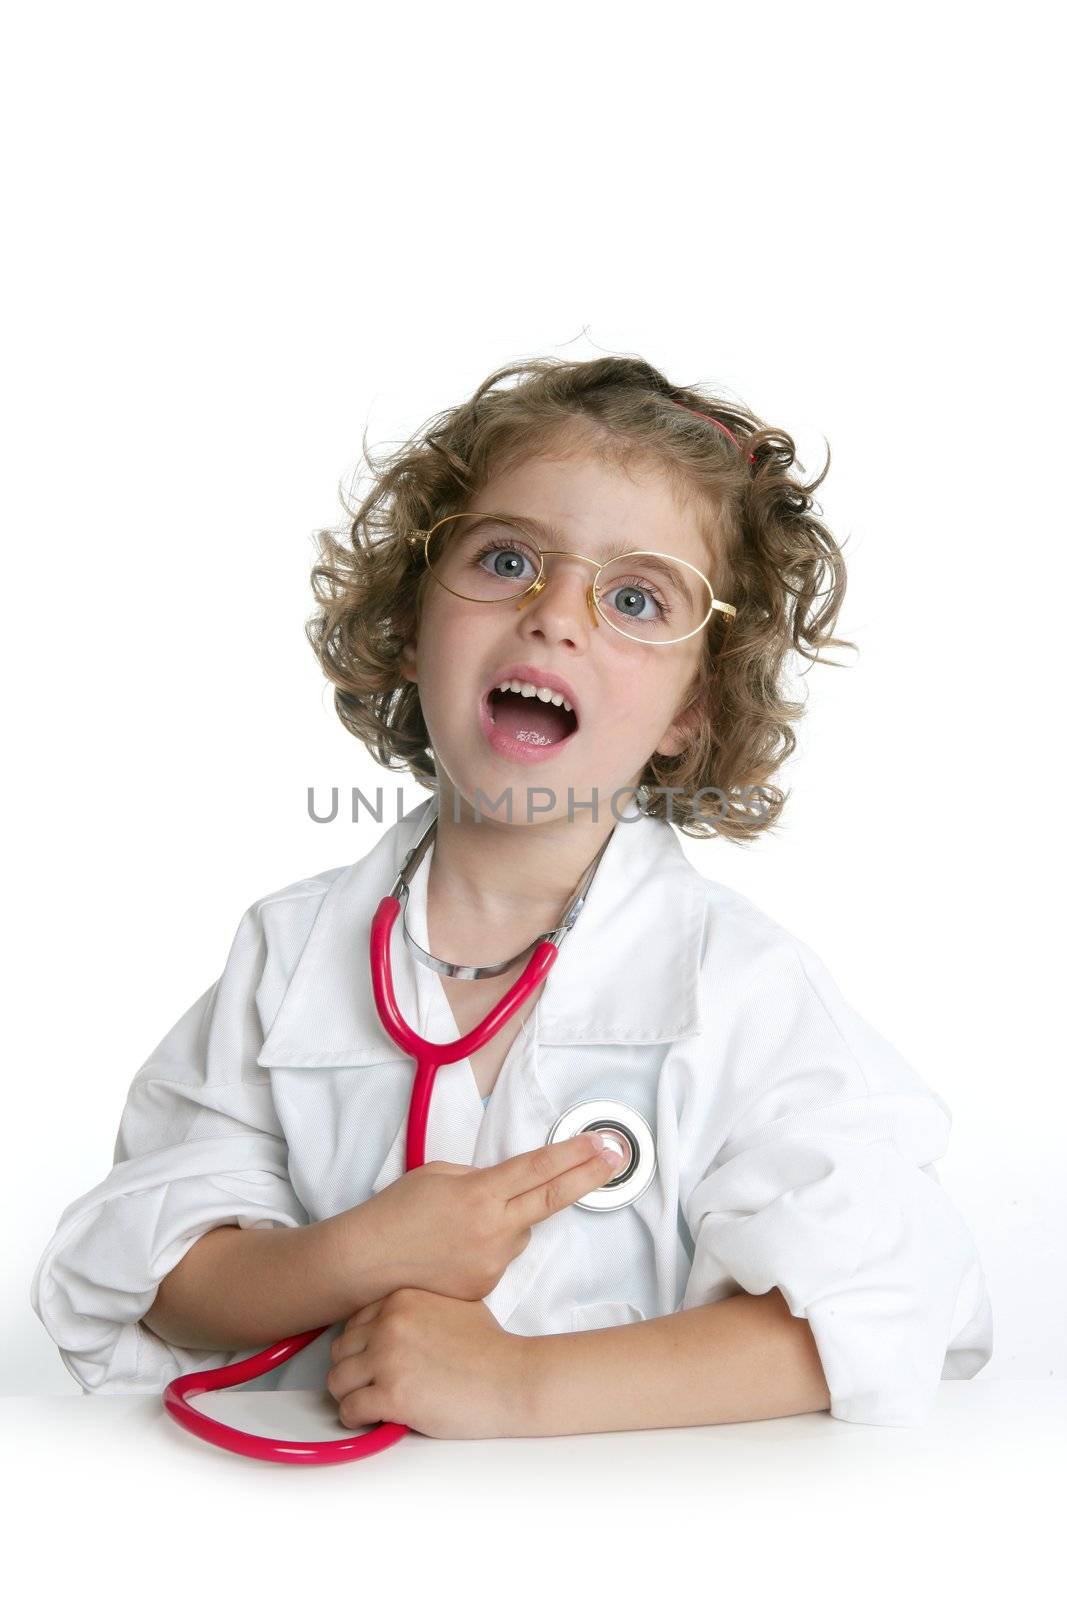 Cute little girl pretending to be a doctor with stethoscope over white